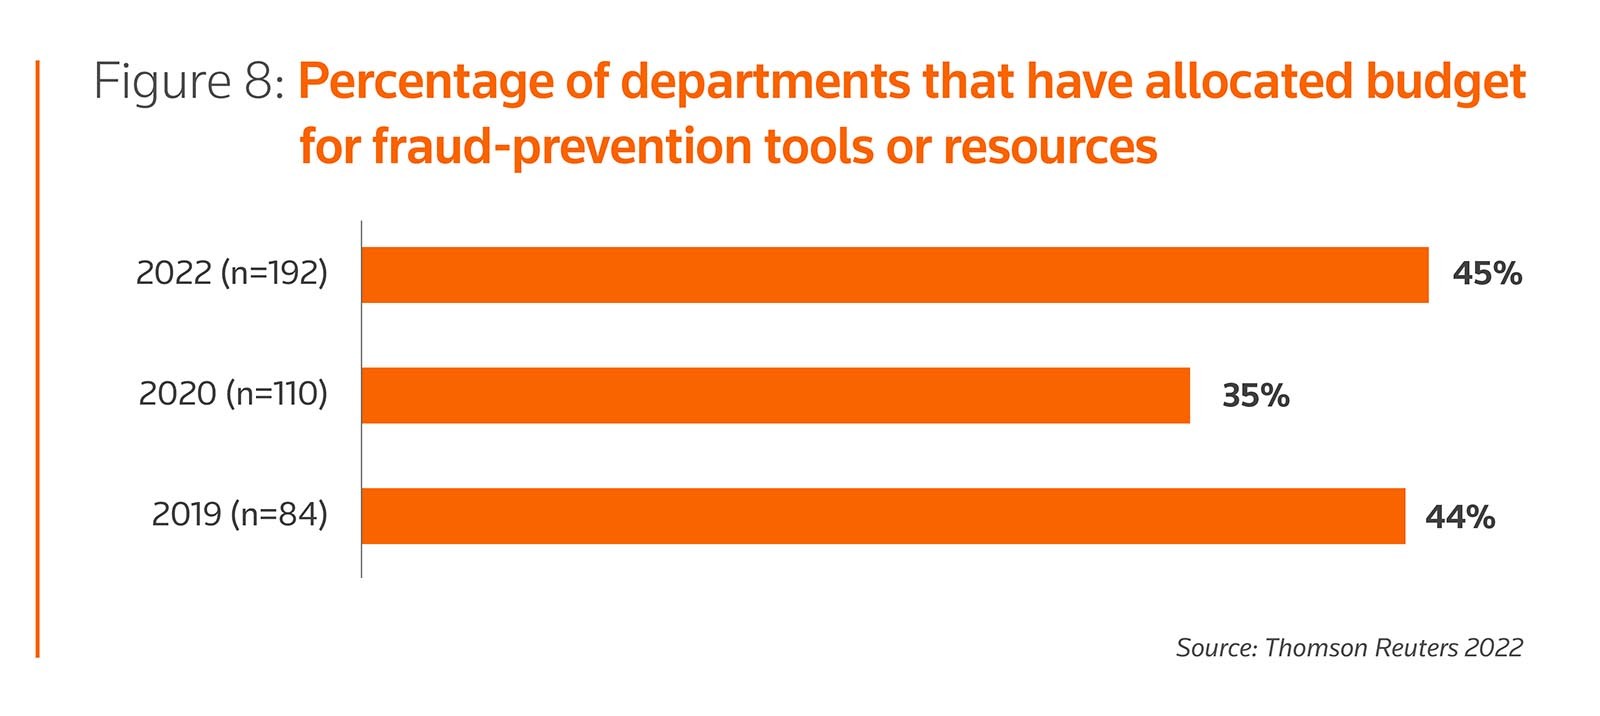 Percentage of departments that have allocated budget for fraud-prevention tools or resources